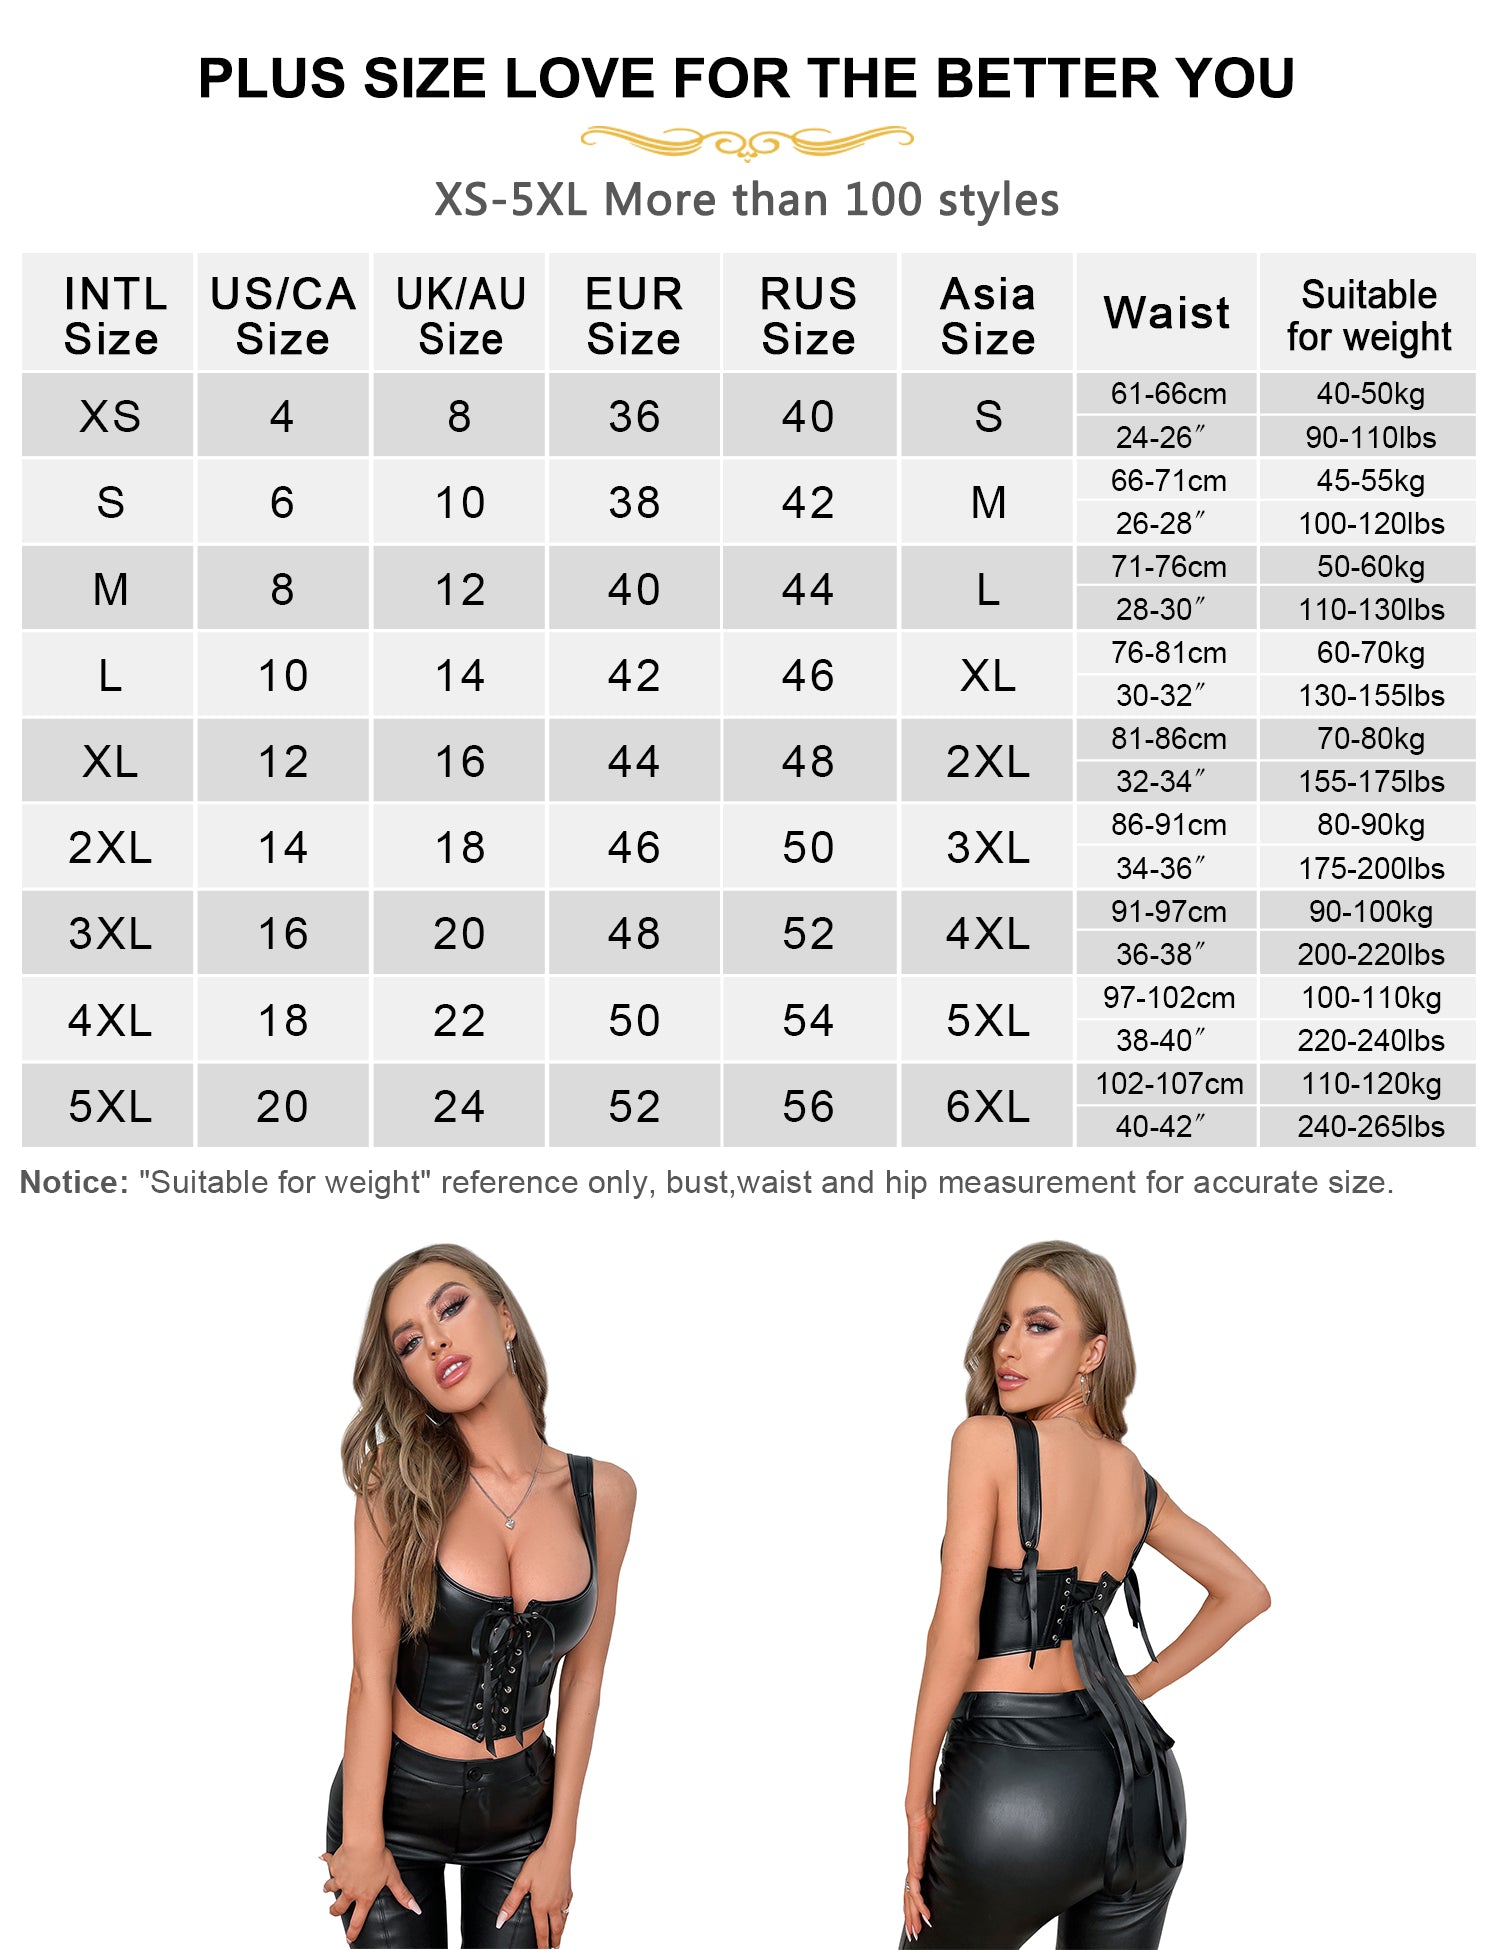 ohyeah sexy vest shapewear Black Corset Top with Adjustable Straps Ladies Corset Faux Leather Boned Bustier Corsets Lace Up Crop Top Party with G-String